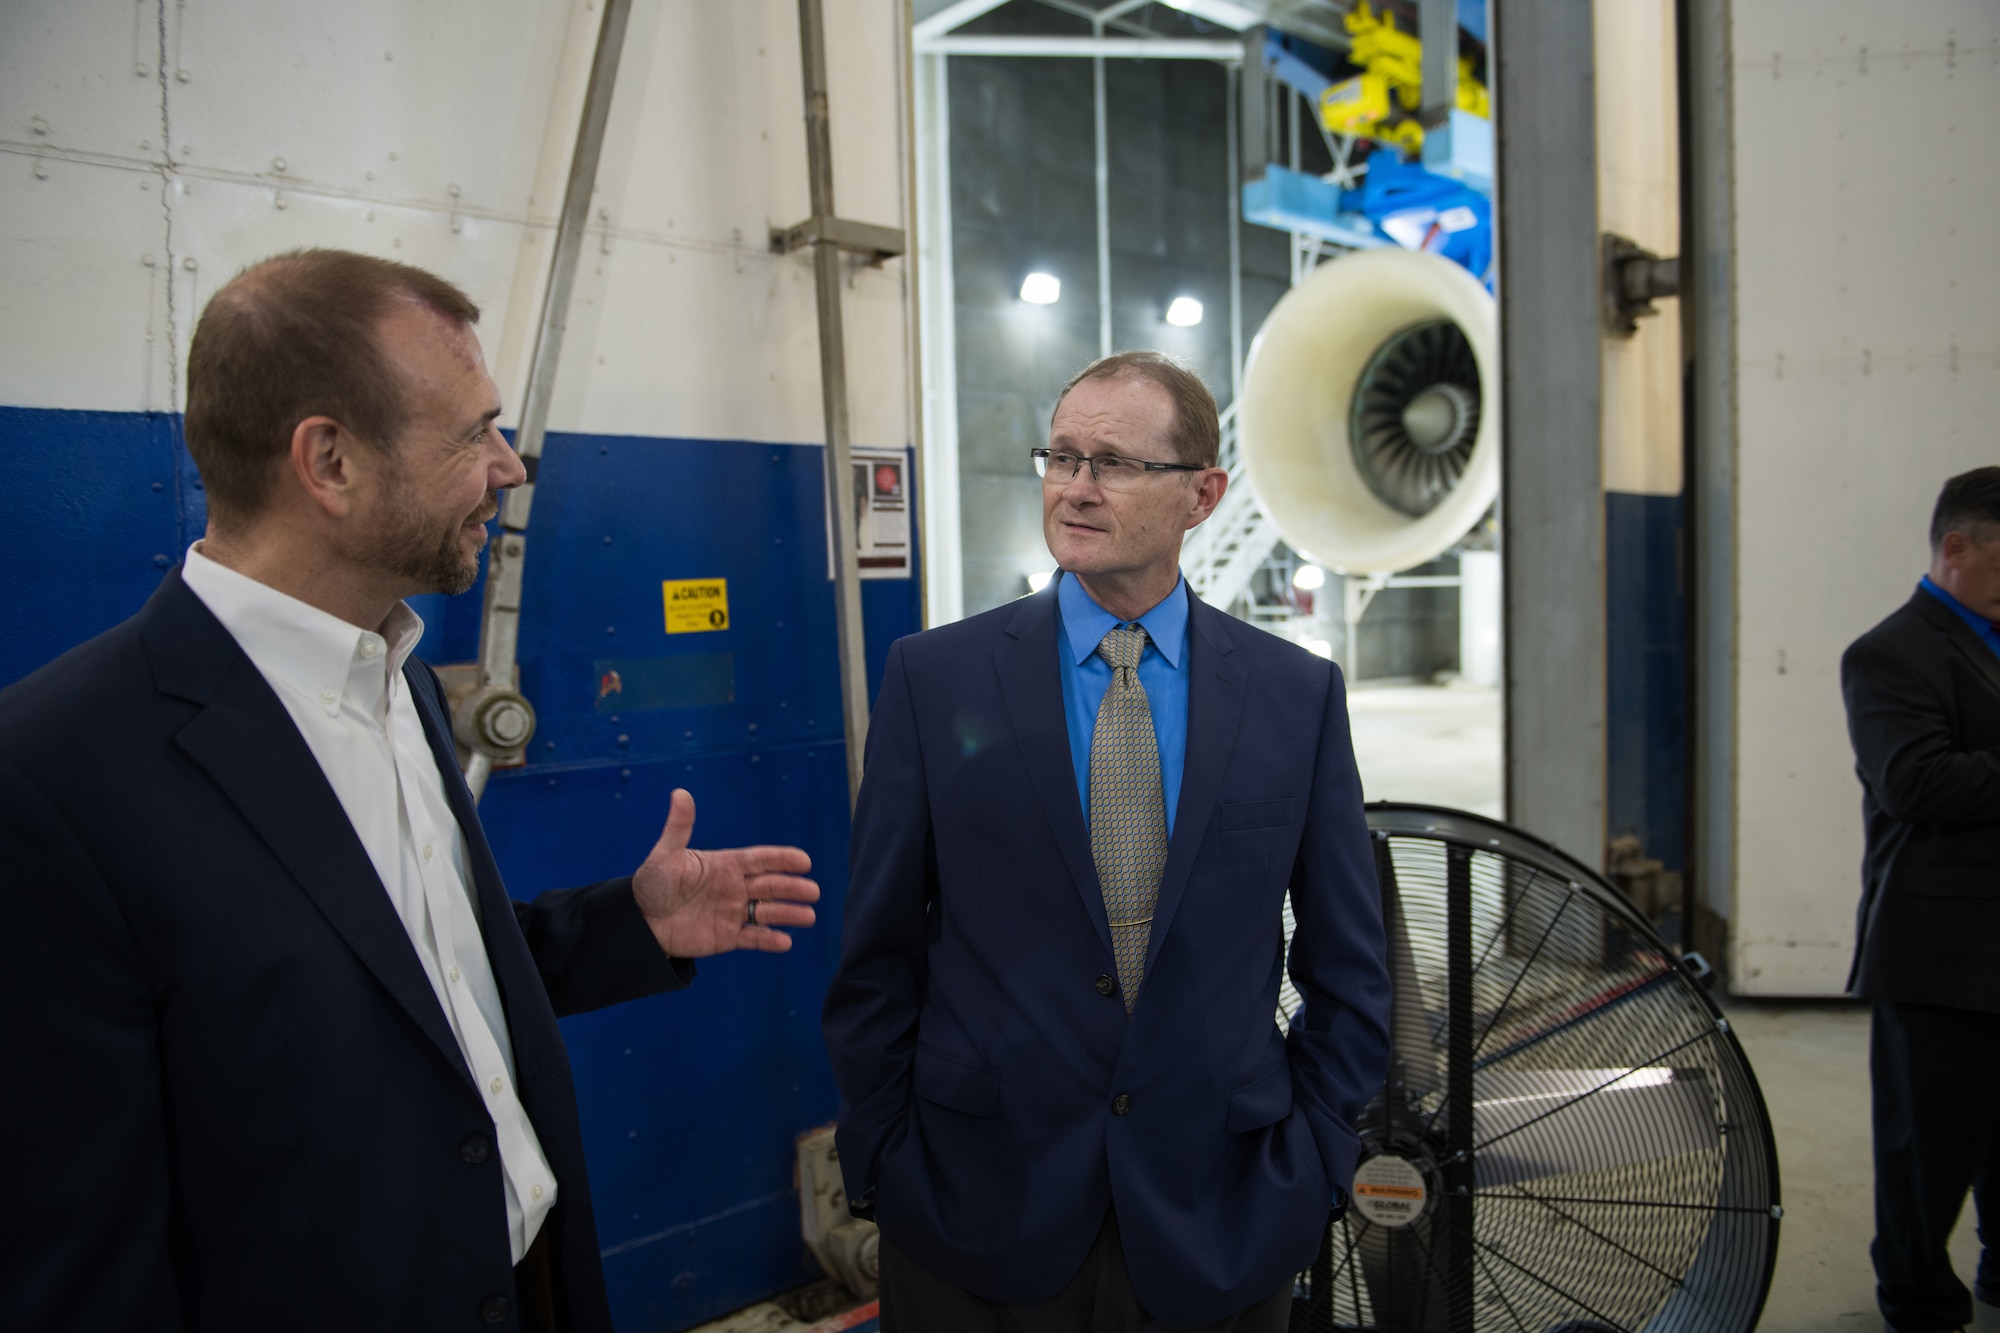 Mark Buongiorno, StandardAero vice-president/general manager (San Antonio), left, talks with Chuck Darnell, Air Force Life-Cycle Management Center Propulsion Sustainment Division director, before the Egyptian Air Force F110 upgrade program ribbon-cutting ceremony held at the StandardAero facilities 25 July, 2019, at Kelly Field, Texas.